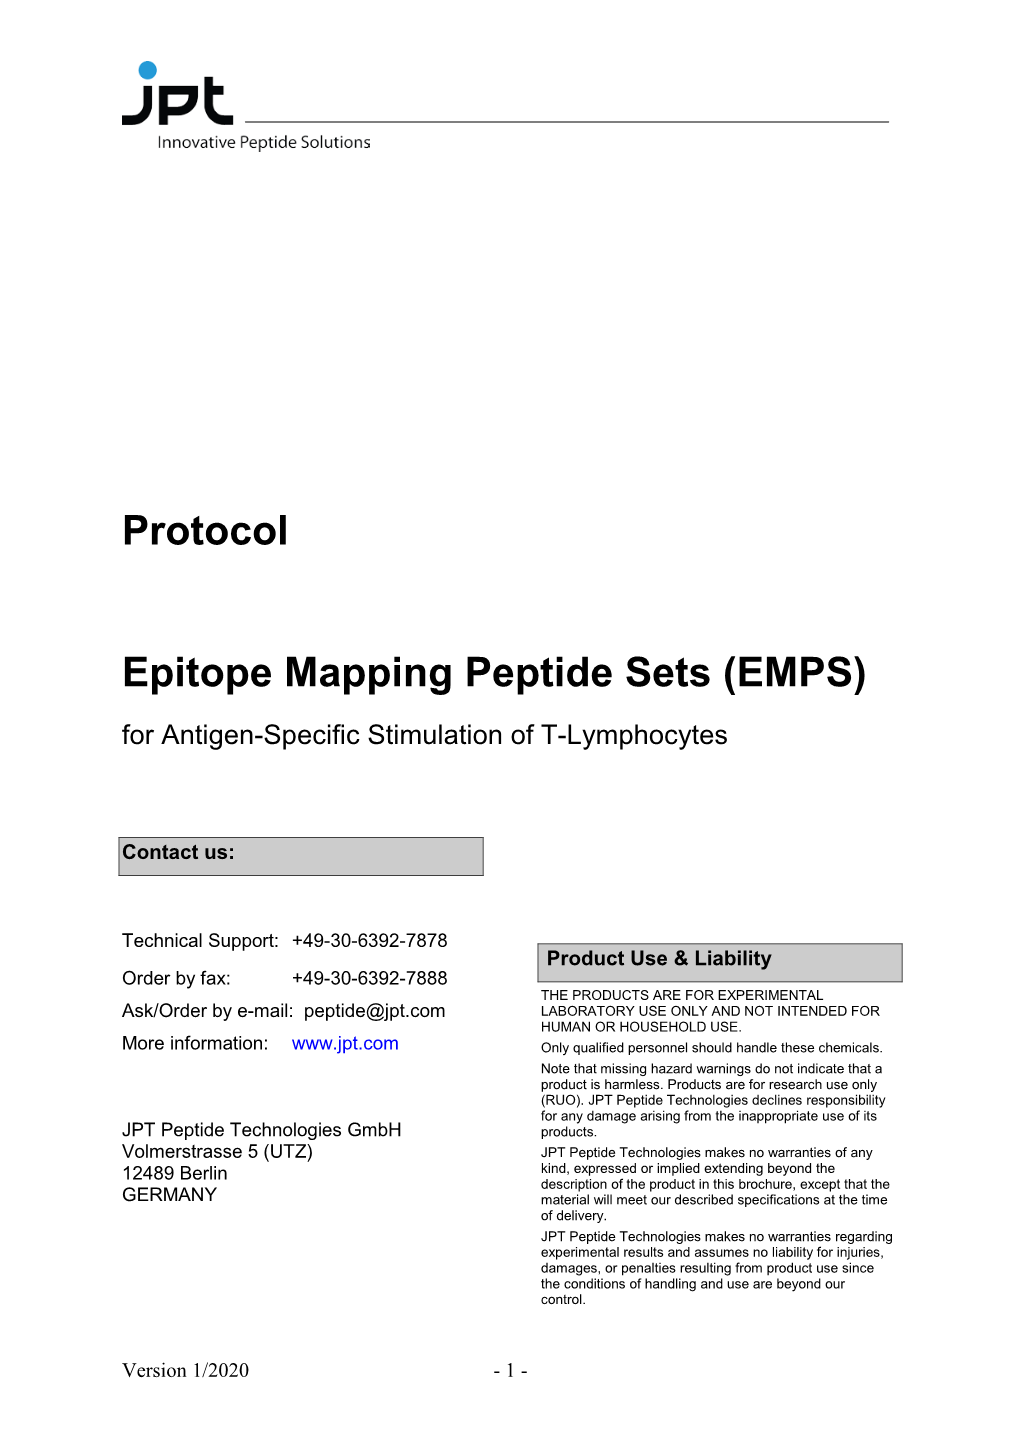 Application Protocol Epitope Mapping Peptide Sets (EMPS)